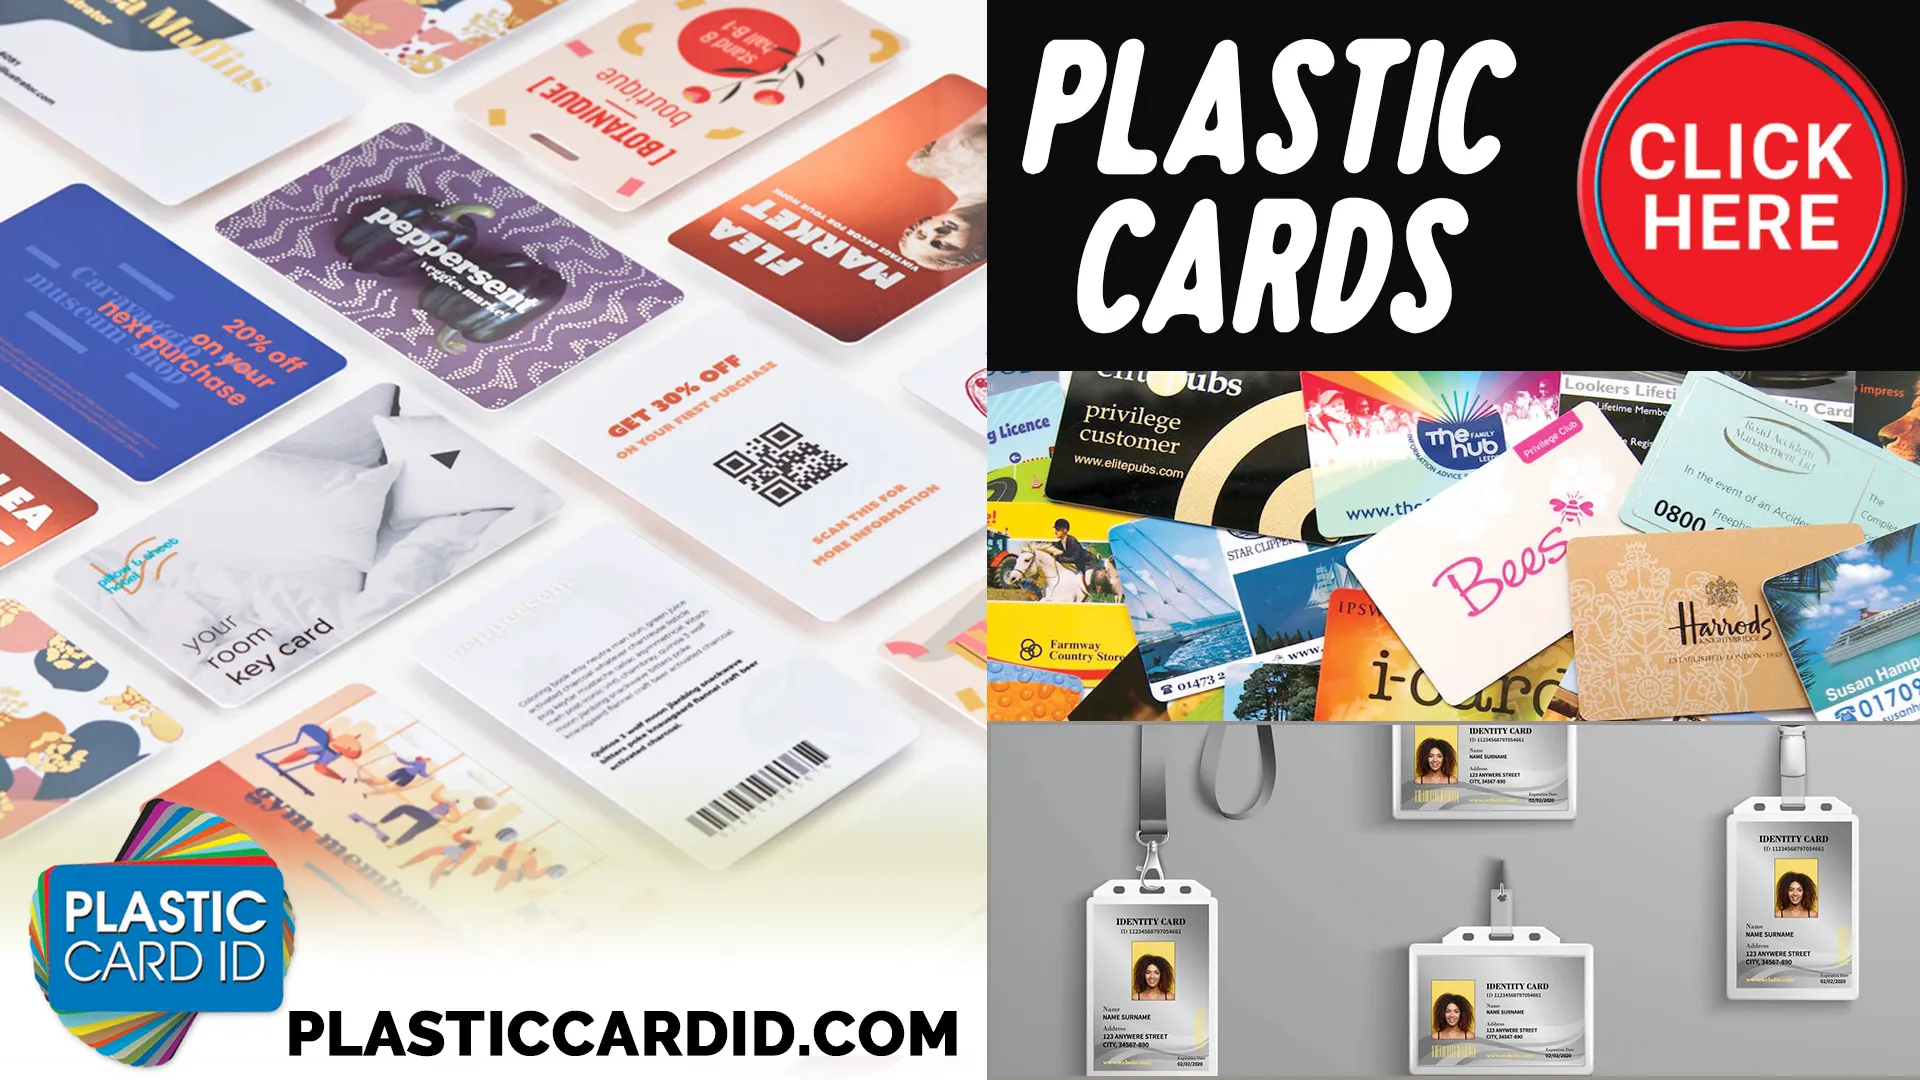 Welcome to the New Era of Plastic Cards